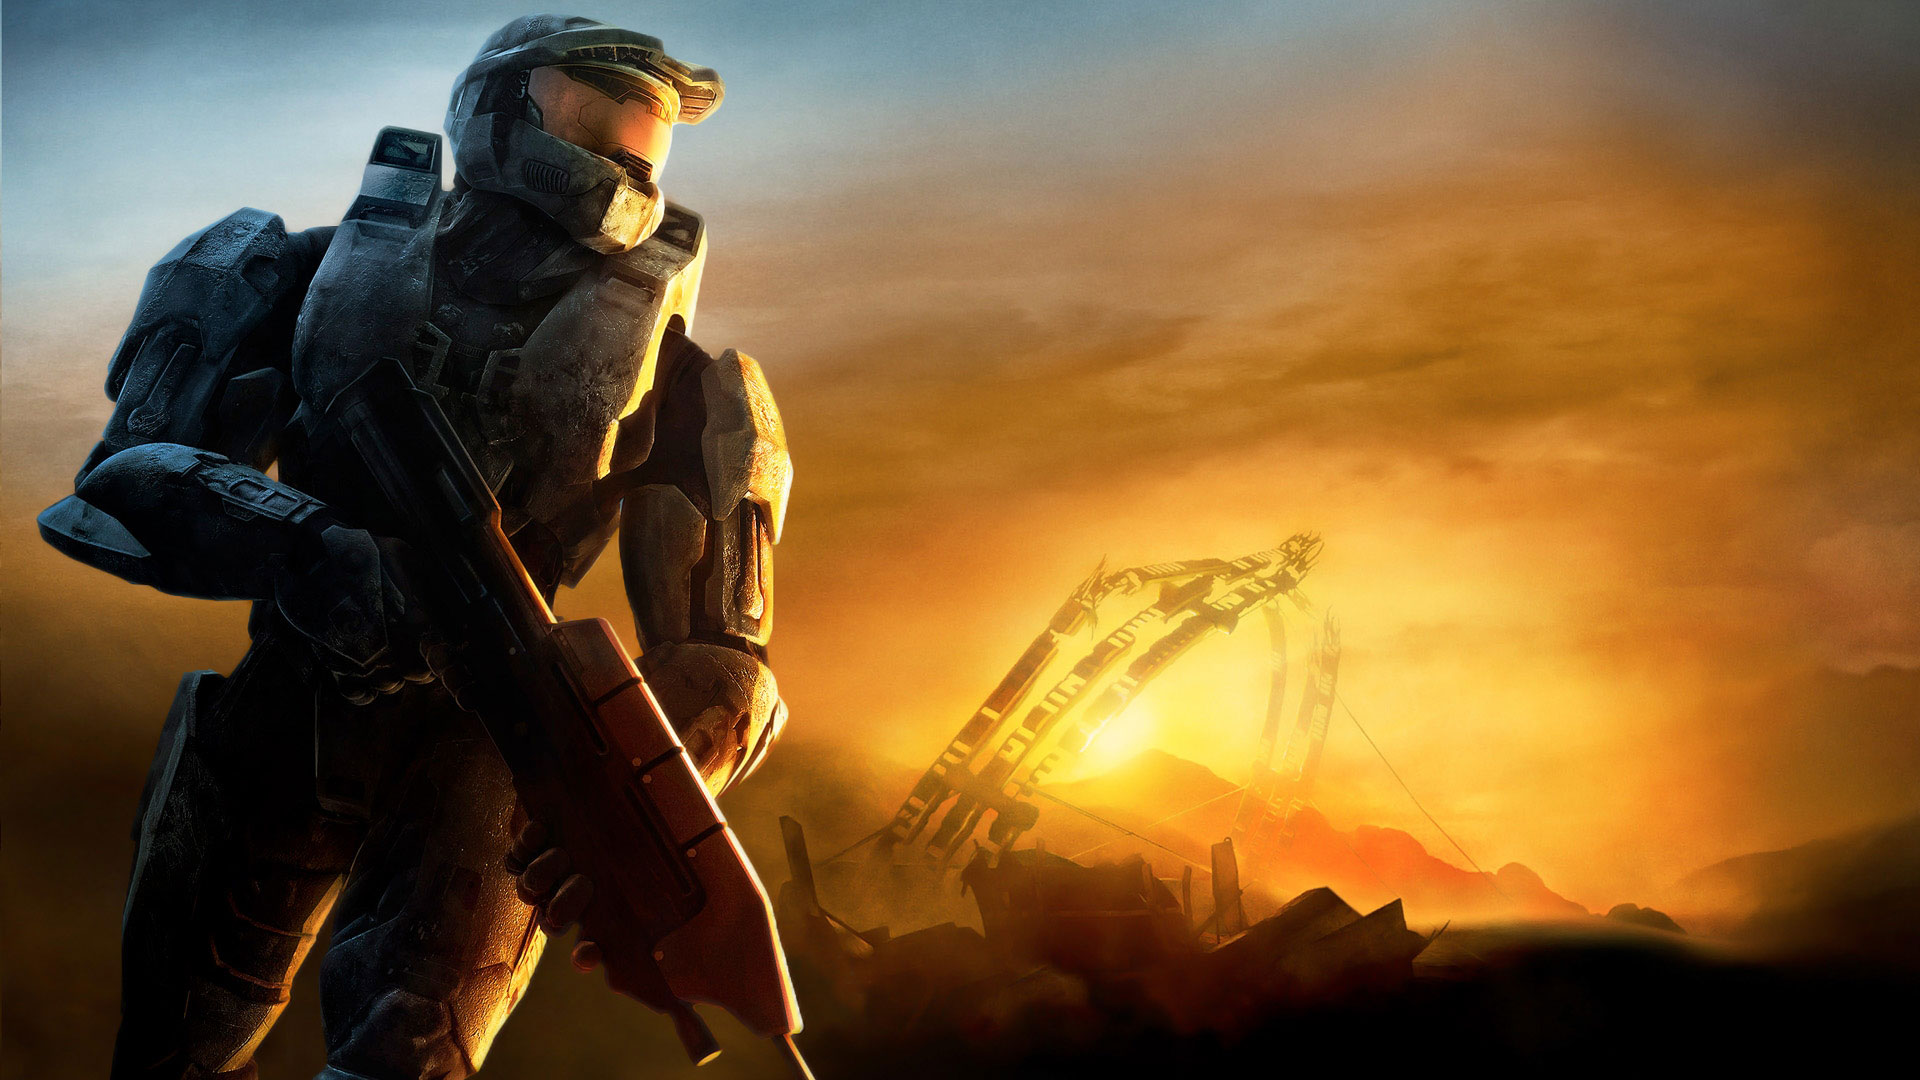 Halo Wallpaper Image Background 1080p Is High Definition